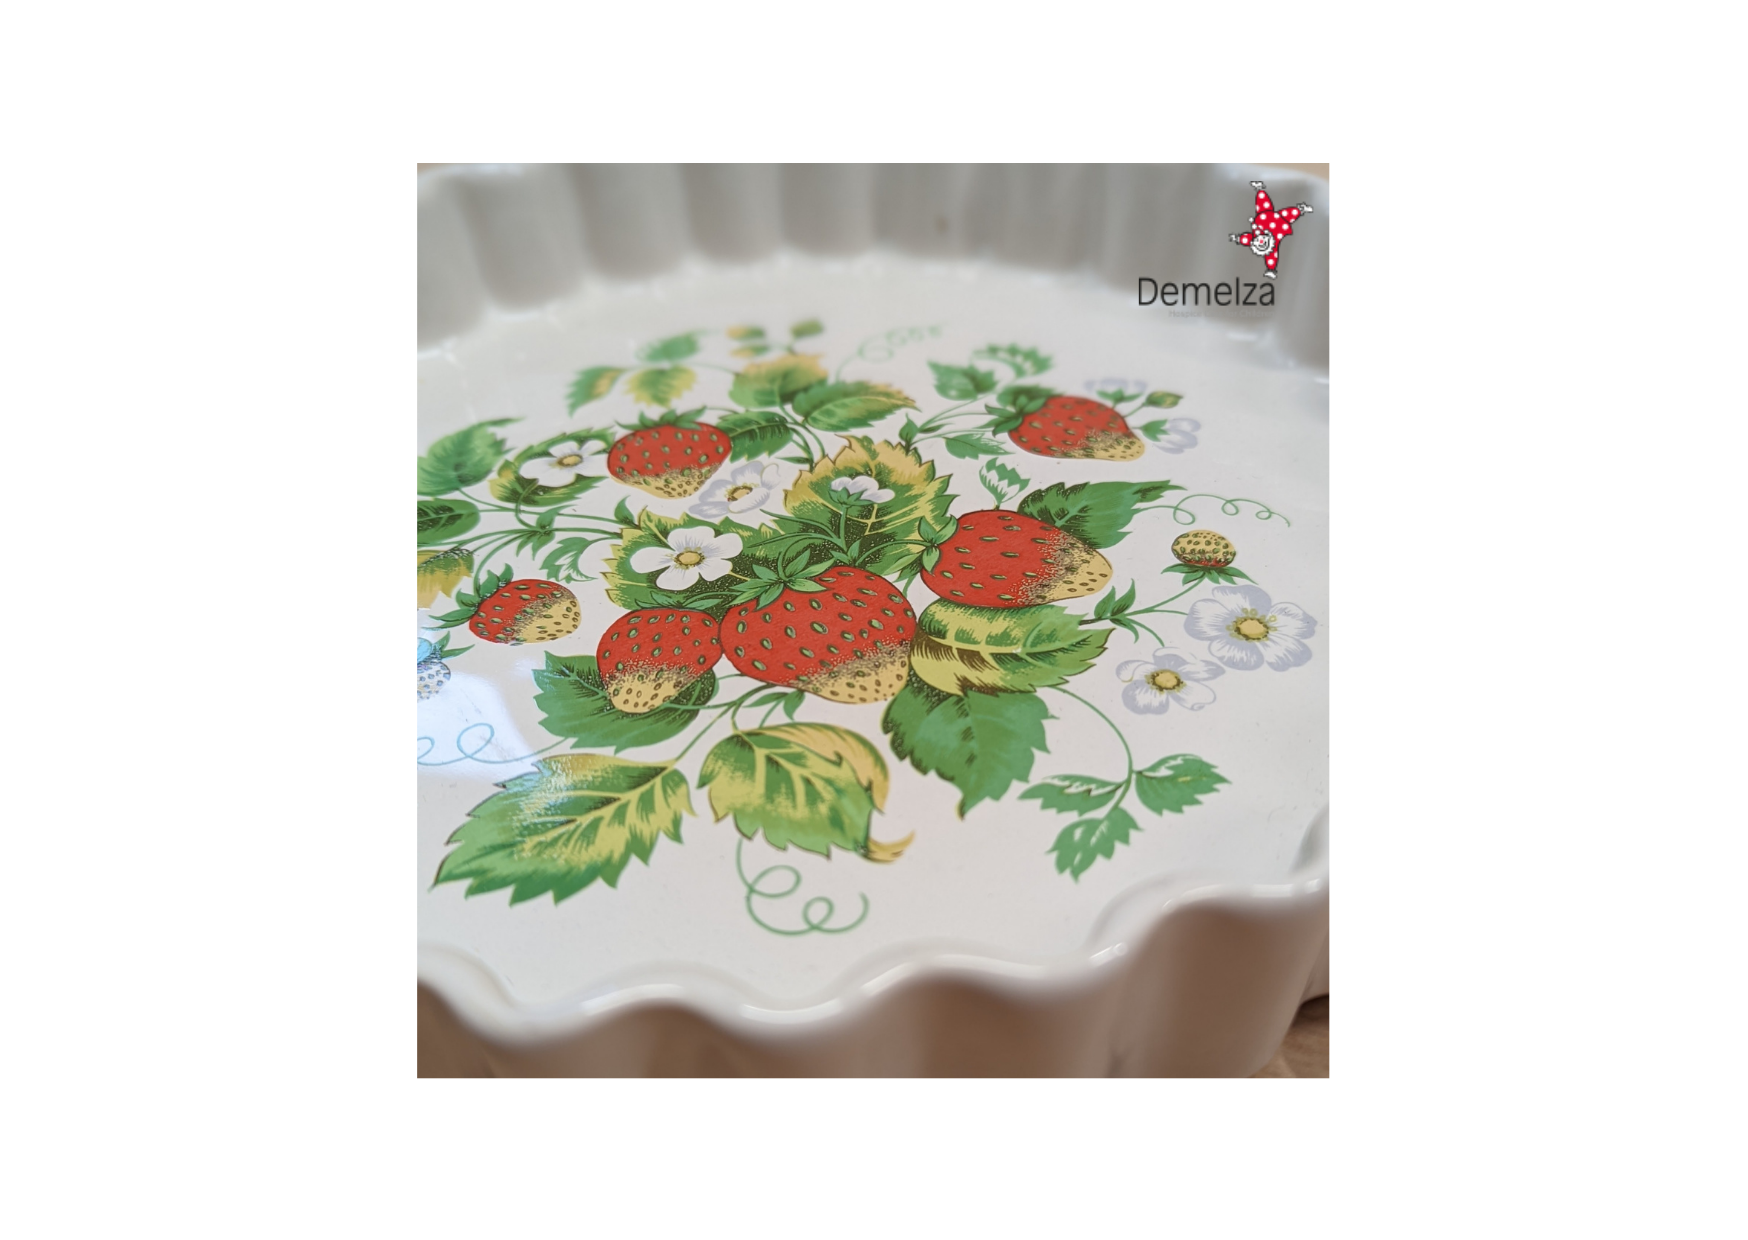 Vintage Style White Ceramic Pie Dish with Green/Red Wild Strawberry Print to Base